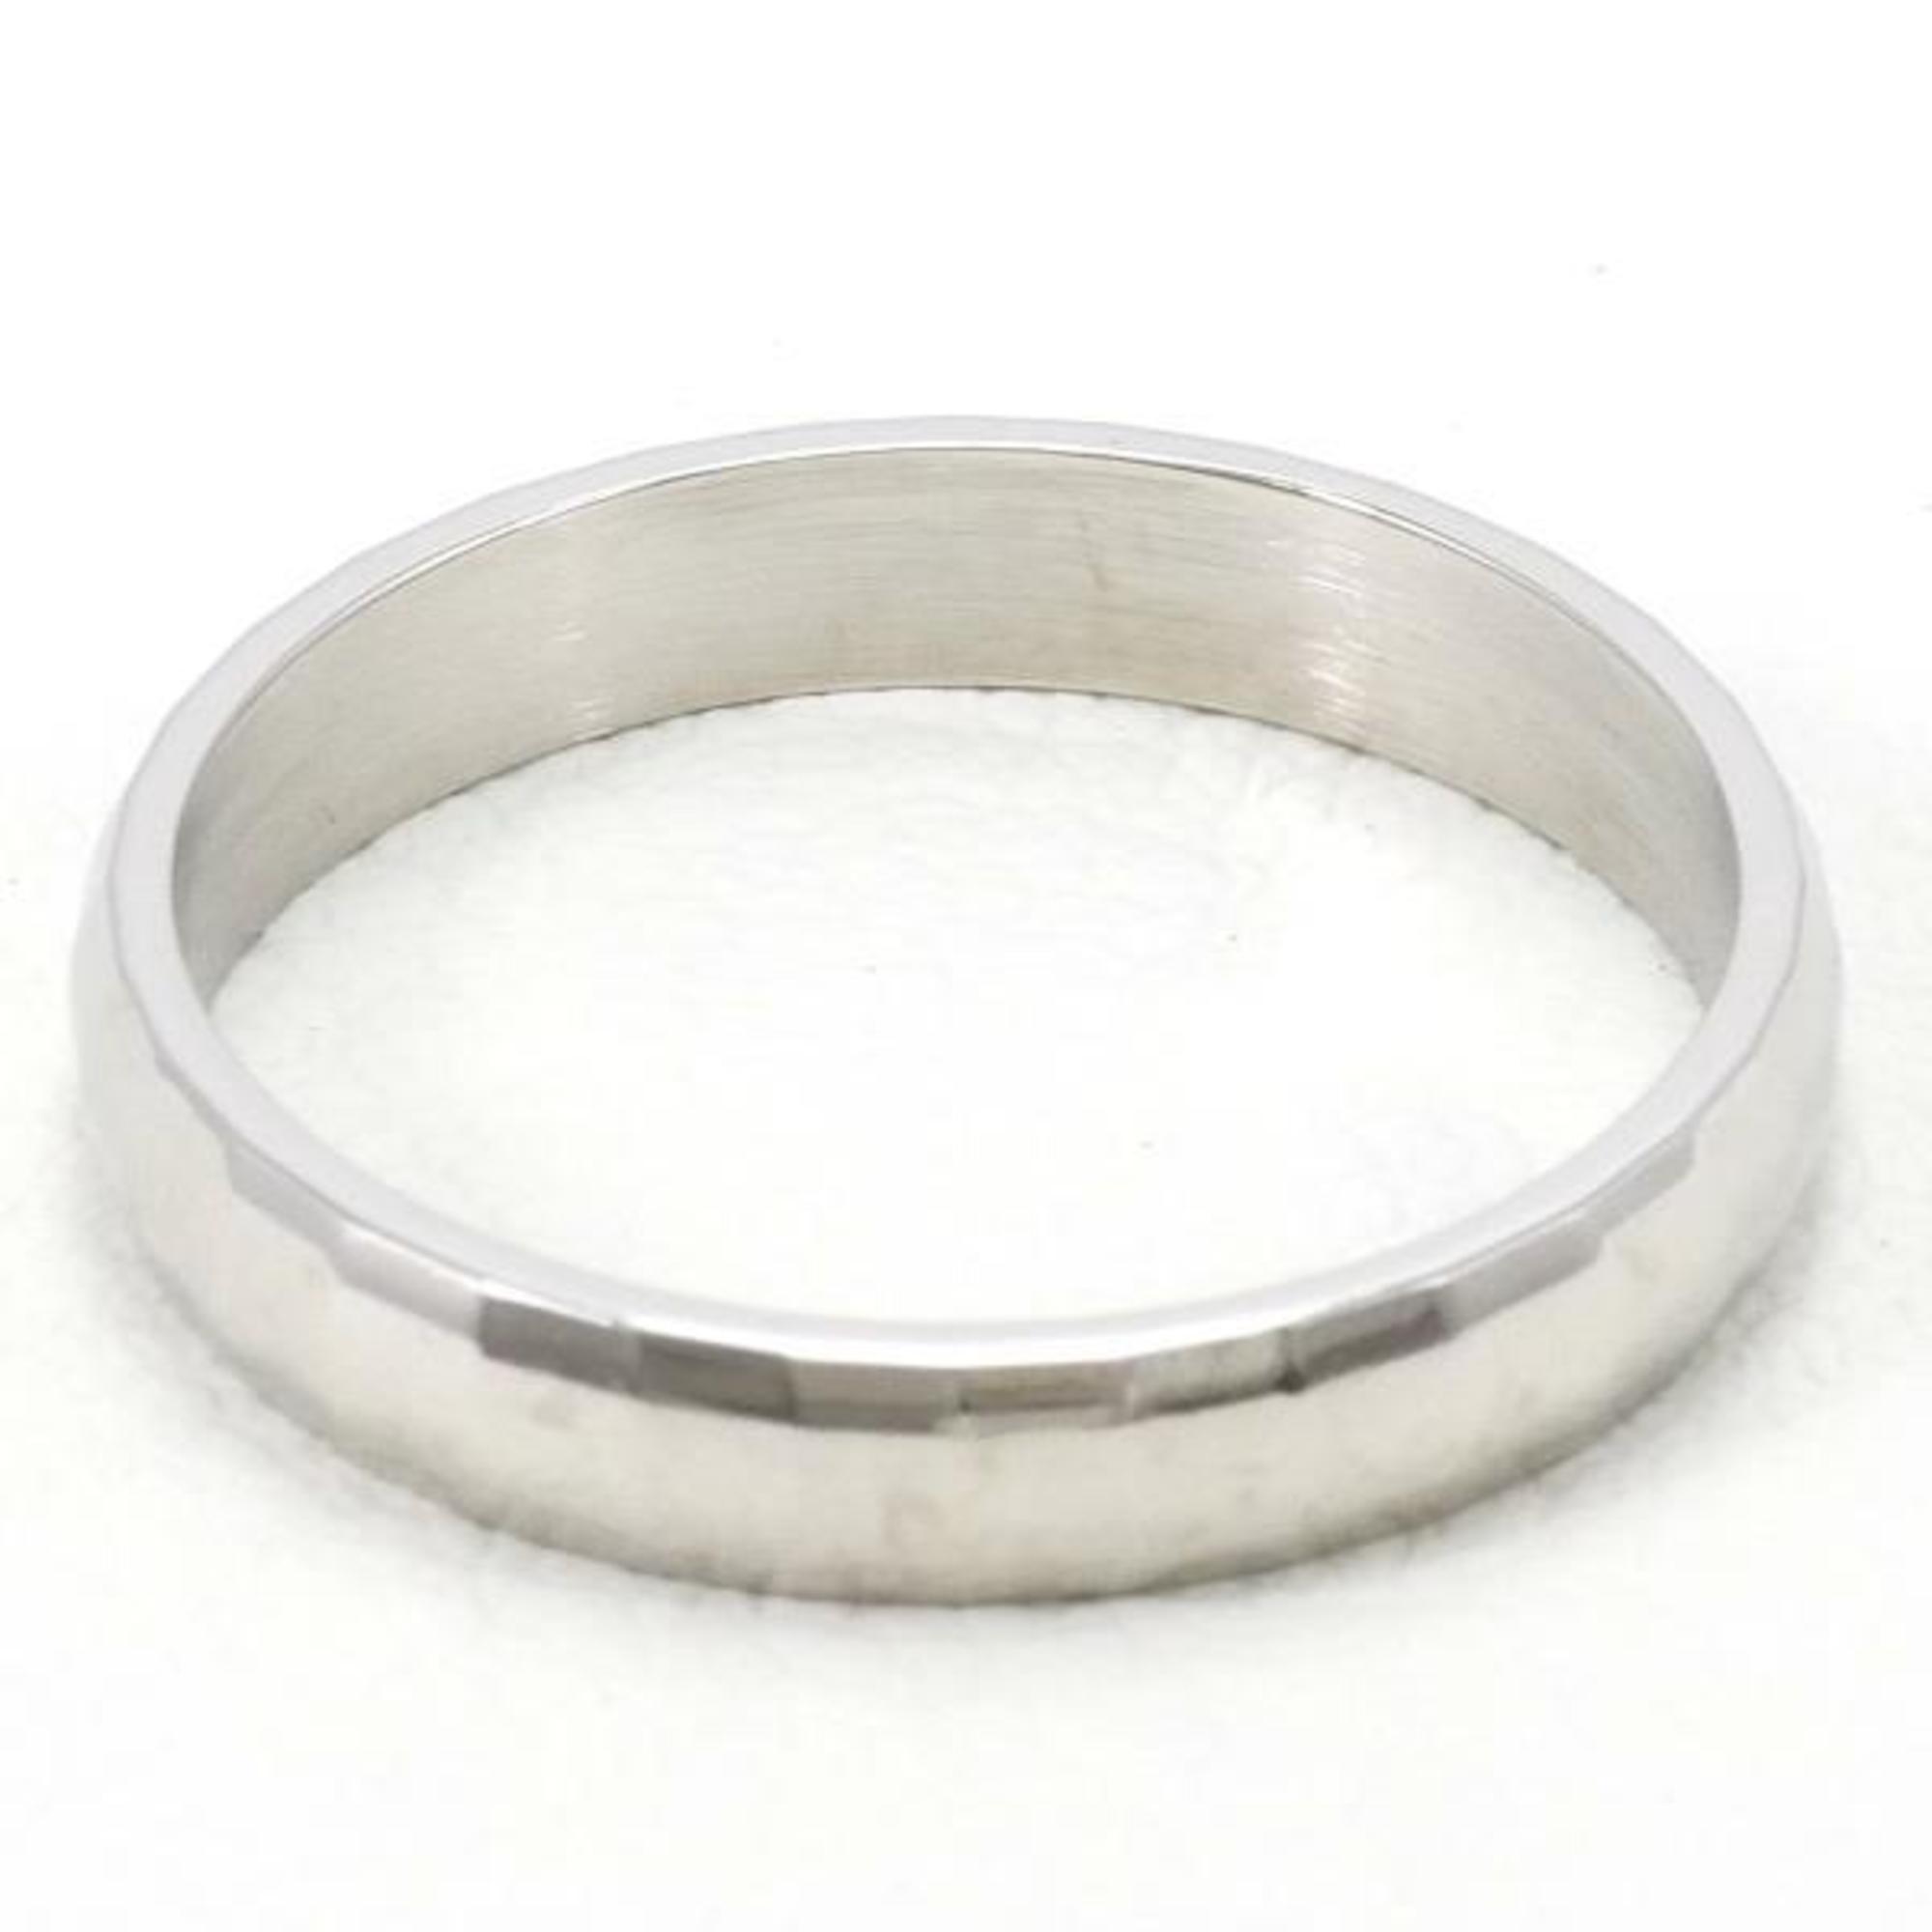 Seiko Jewelry PT900 Ring No. 8 Total Weight Approx. 2.8g